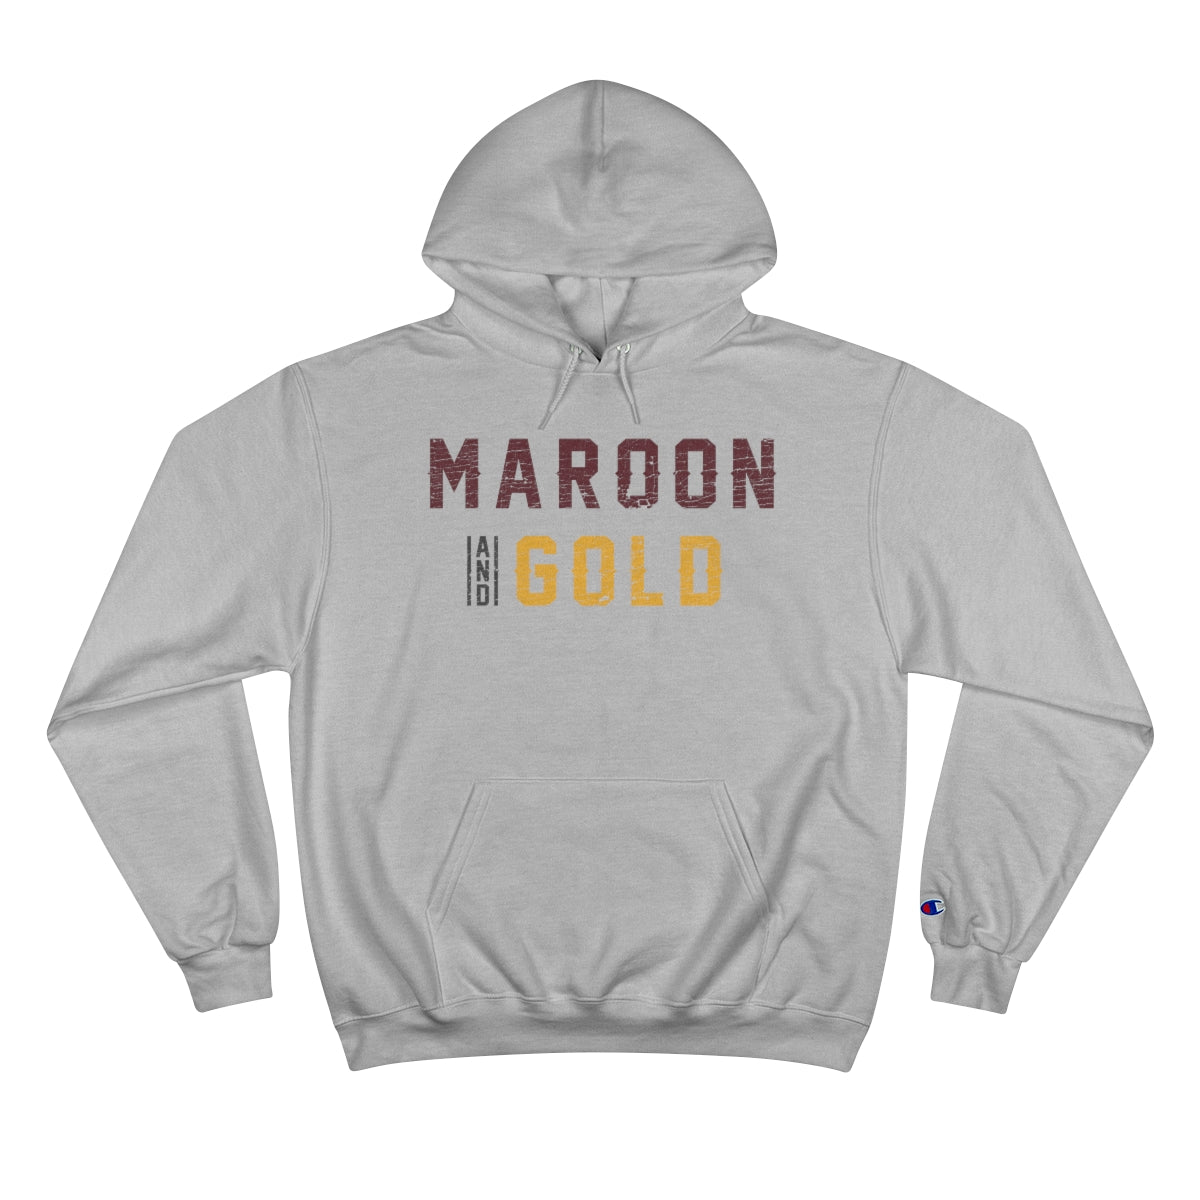 MAROON AND GOLD-Champion Hoodie